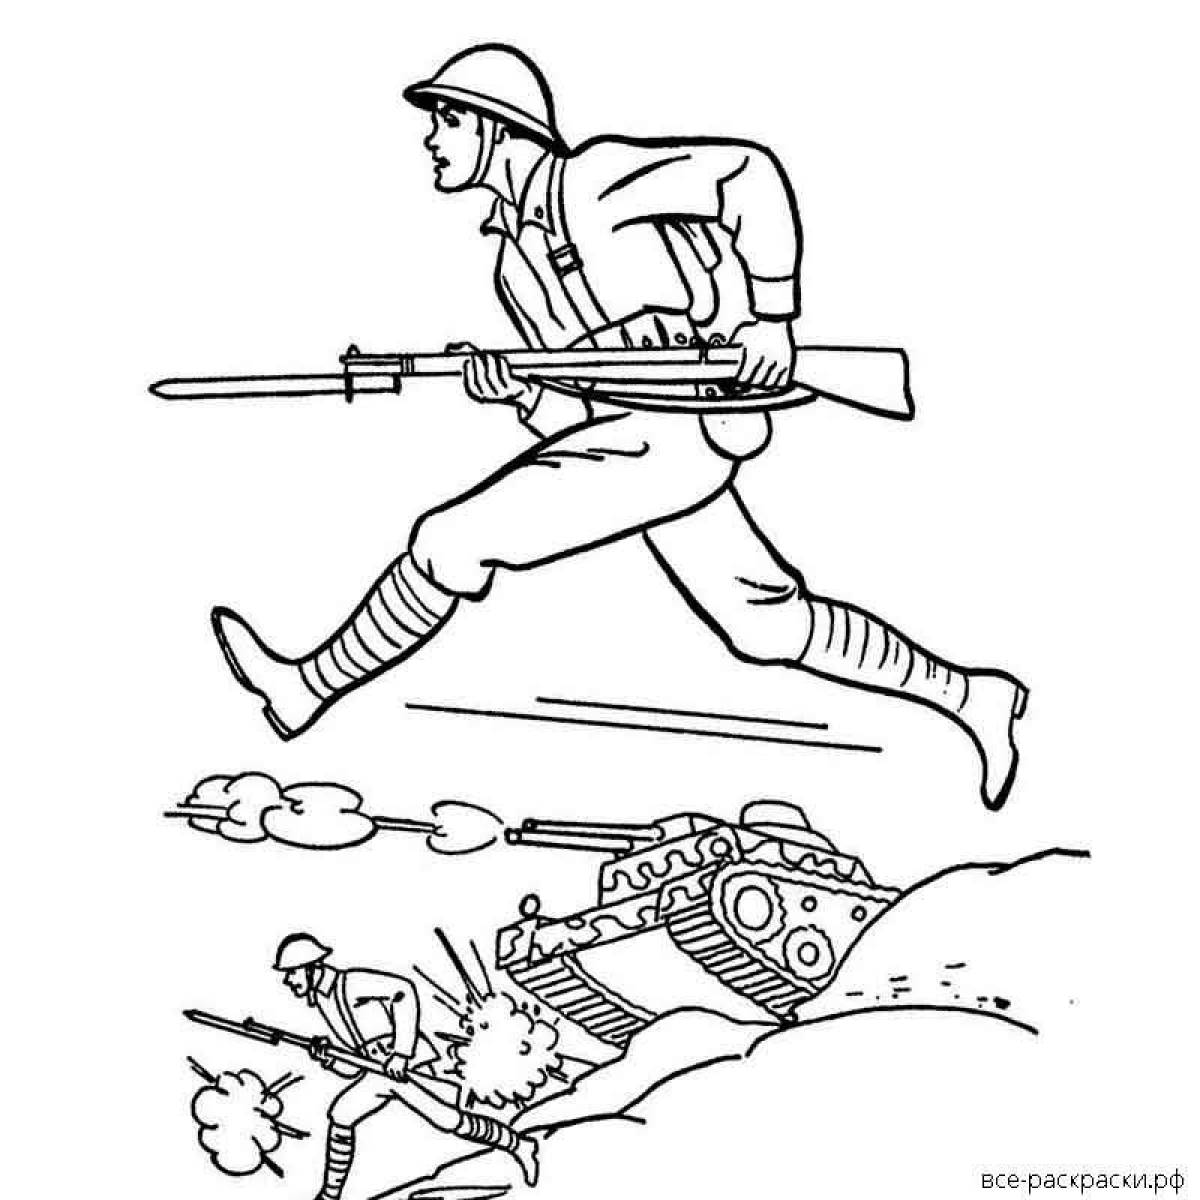 Inspirational coloring book of the battle of stalingrad